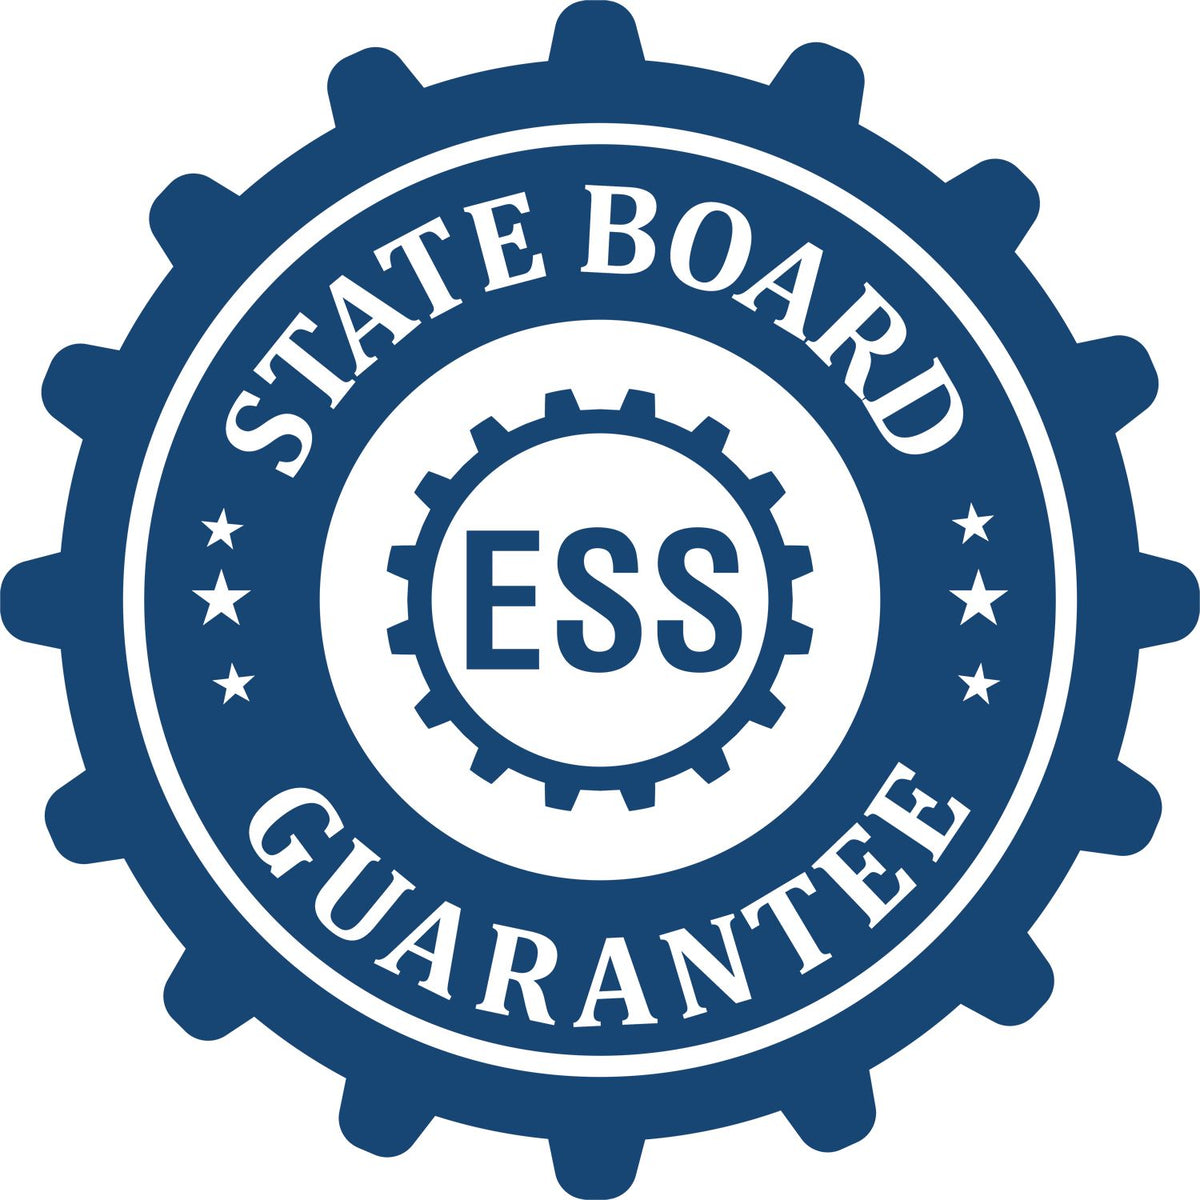 An emblem in a gear shape illustrating a state board guarantee for the State of Idaho Extended Long Reach Geologist Seal